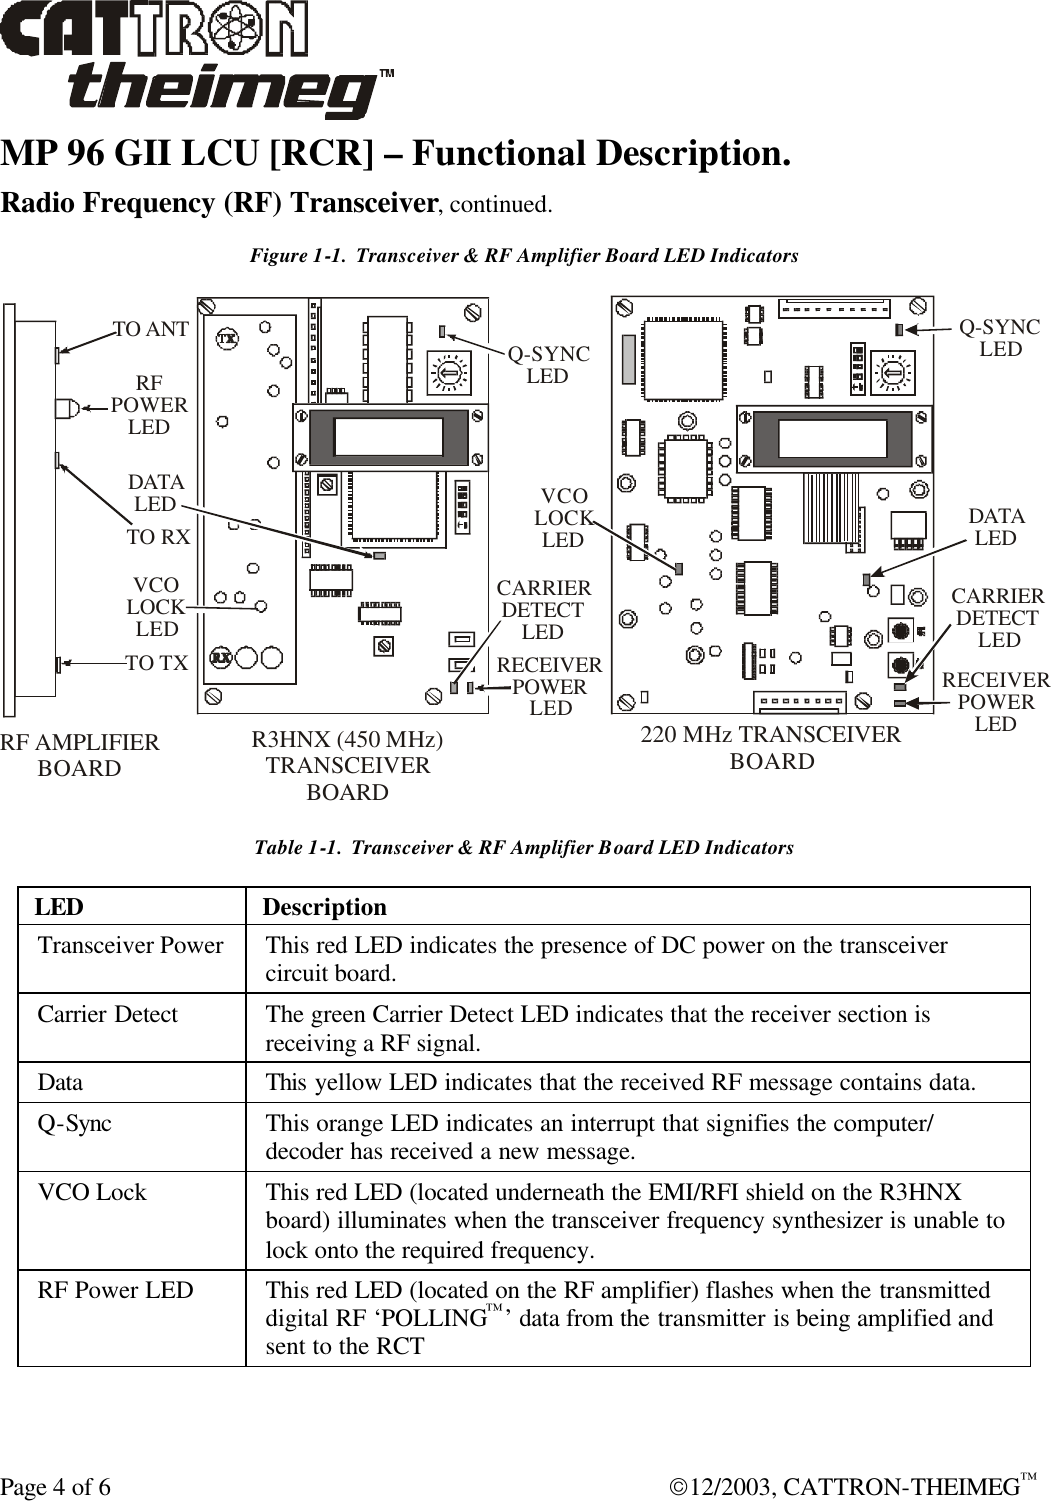  Page 4 of 6  12/2003, CATTRON-THEIMEG™ MP 96 GII LCU [RCR] – Functional Description. Radio Frequency (RF) Transceiver, continued. Figure 1-1.  Transceiver &amp; RF Amplifier Board LED Indicators R3HNX (450 Mz) TRANSCEIVERBOARDHRF AMPLIFIER BOARD220 Mz TRANSCEIVER BOARDHVCOLOCKLED DATALEDQ-SYNCLEDCARRIERDETECTLEDRECEIVERPOWERLEDVCOLOCKLEDDATALEDRF POWERLEDTO ANTTO RXTO TXQ-SYNCLEDCARRIERDETECTLEDRECEIVERPOWERLED Table 1-1.  Transceiver &amp; RF Amplifier Board LED Indicators  LED Description Transceiver Power  This red LED indicates the presence of DC power on the transceiver circuit board. Carrier Detect The green Carrier Detect LED indicates that the receiver section is receiving a RF signal. Data This yellow LED indicates that the received RF message contains data. Q-Sync This orange LED indicates an interrupt that signifies the computer/ decoder has received a new message. VCO Lock This red LED (located underneath the EMI/RFI shield on the R3HNX board) illuminates when the transceiver frequency synthesizer is unable to lock onto the required frequency. RF Power LED This red LED (located on the RF amplifier) flashes when the transmitted digital RF ‘POLLING™’ data from the transmitter is being amplified and sent to the RCT 